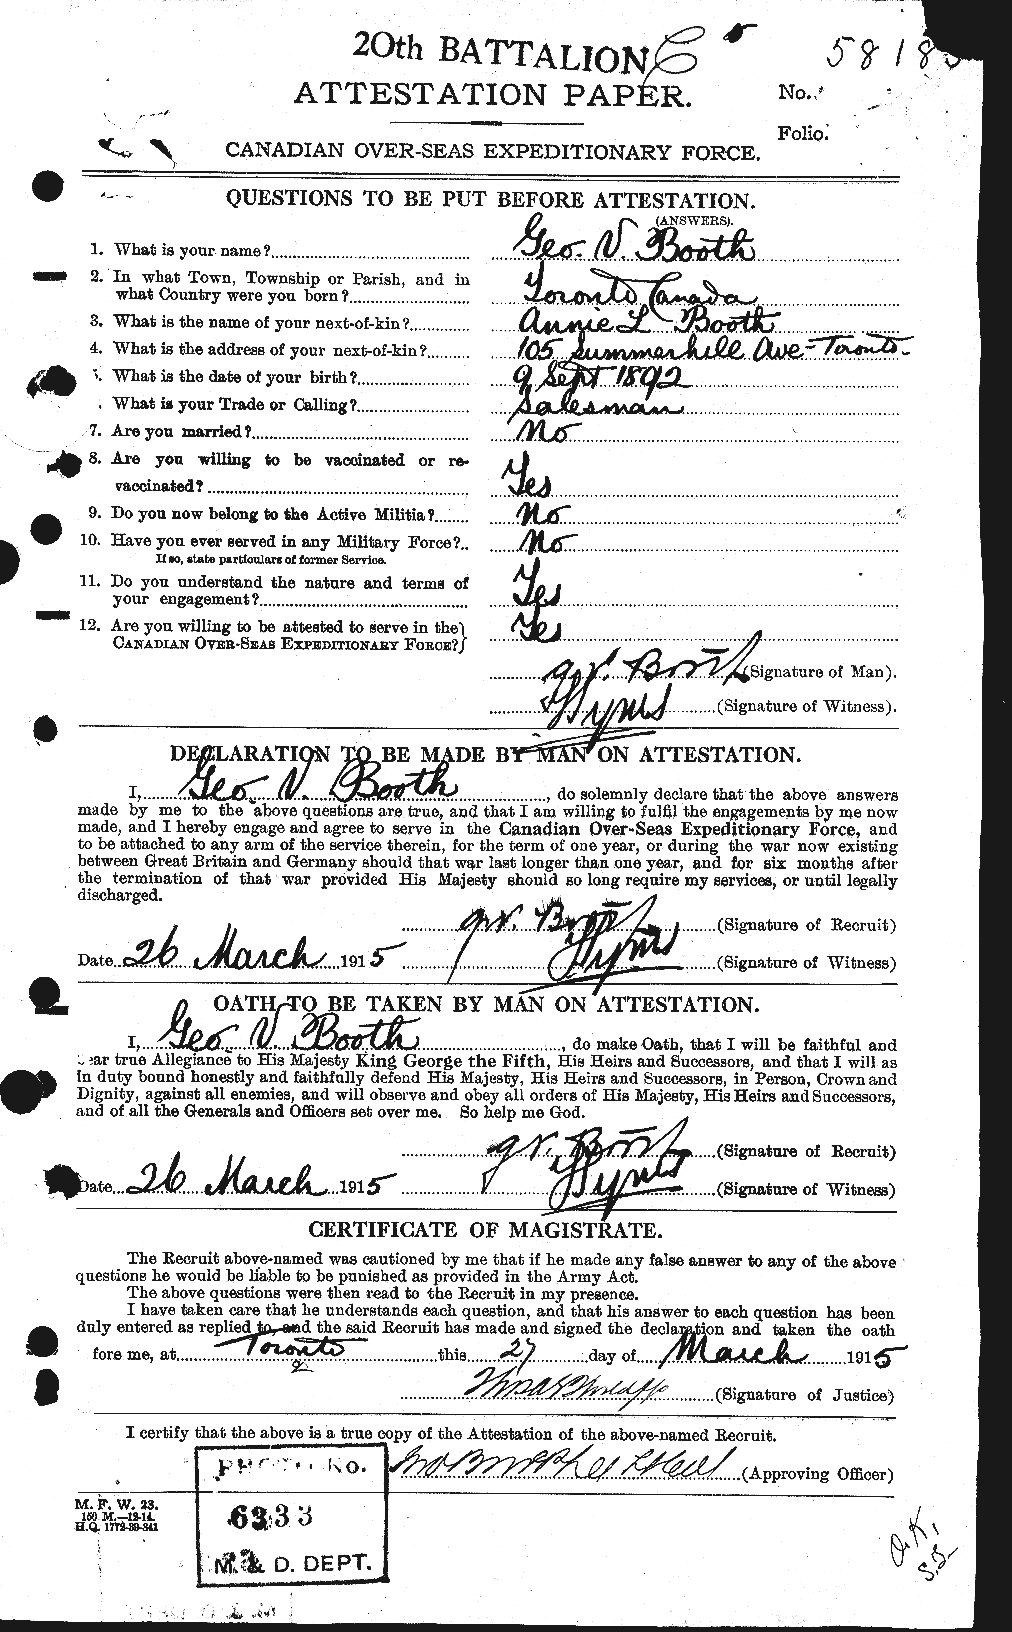 Personnel Records of the First World War - CEF 250866a